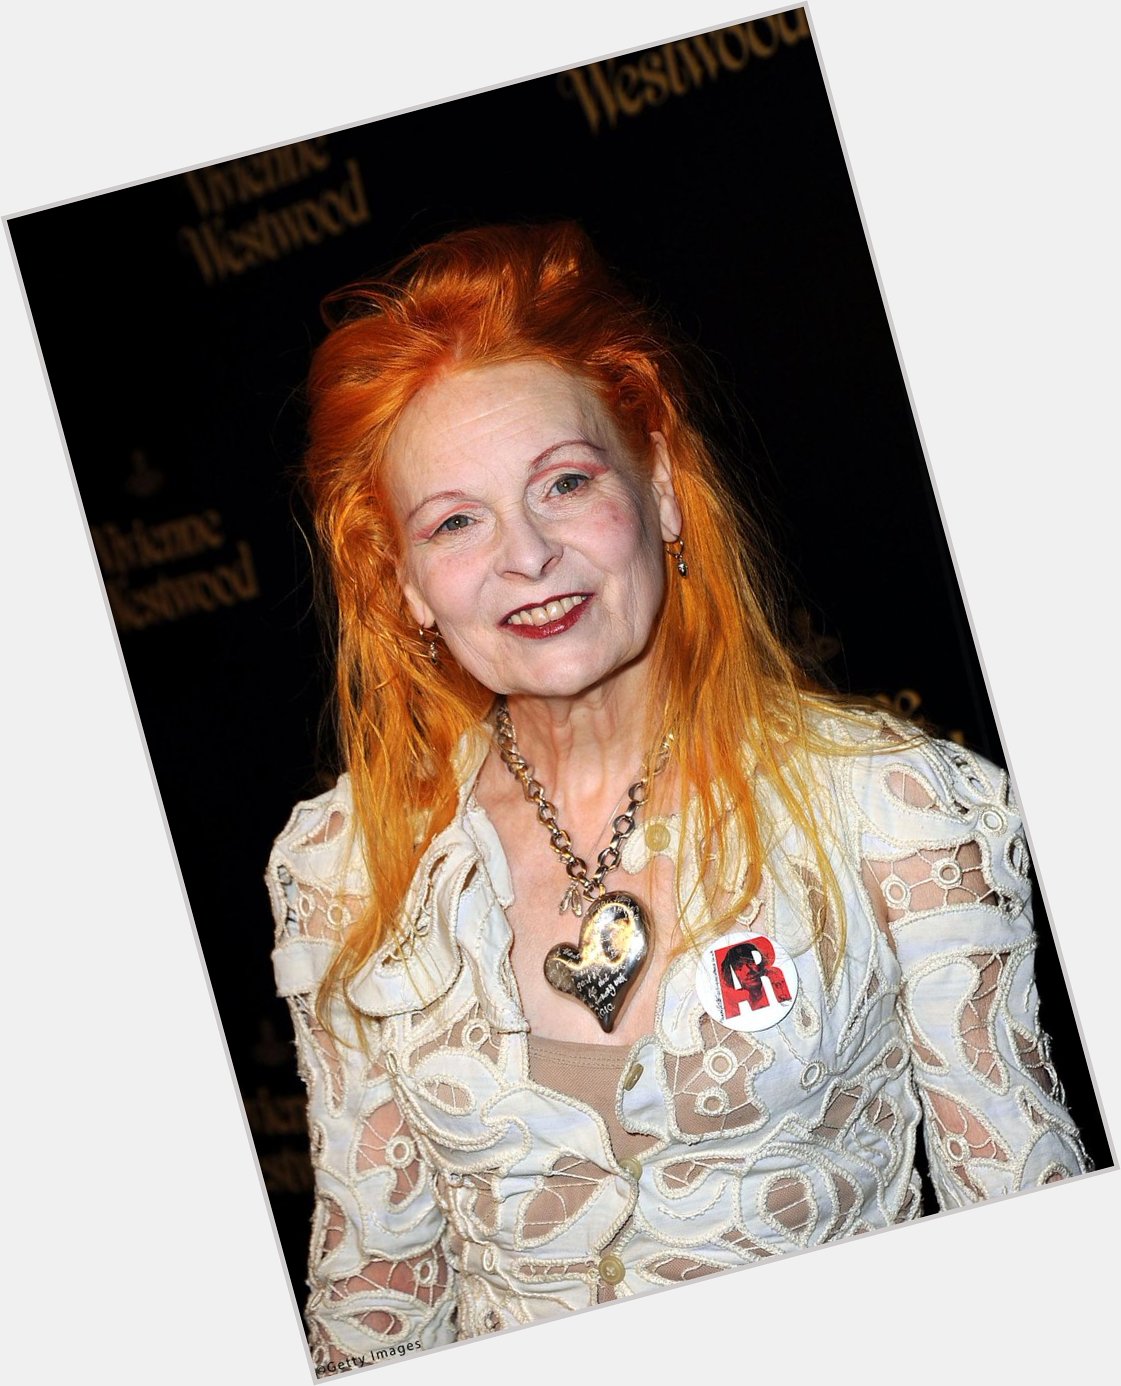 Happy birthday to the Queen of Punk, Vivienne Westwood  